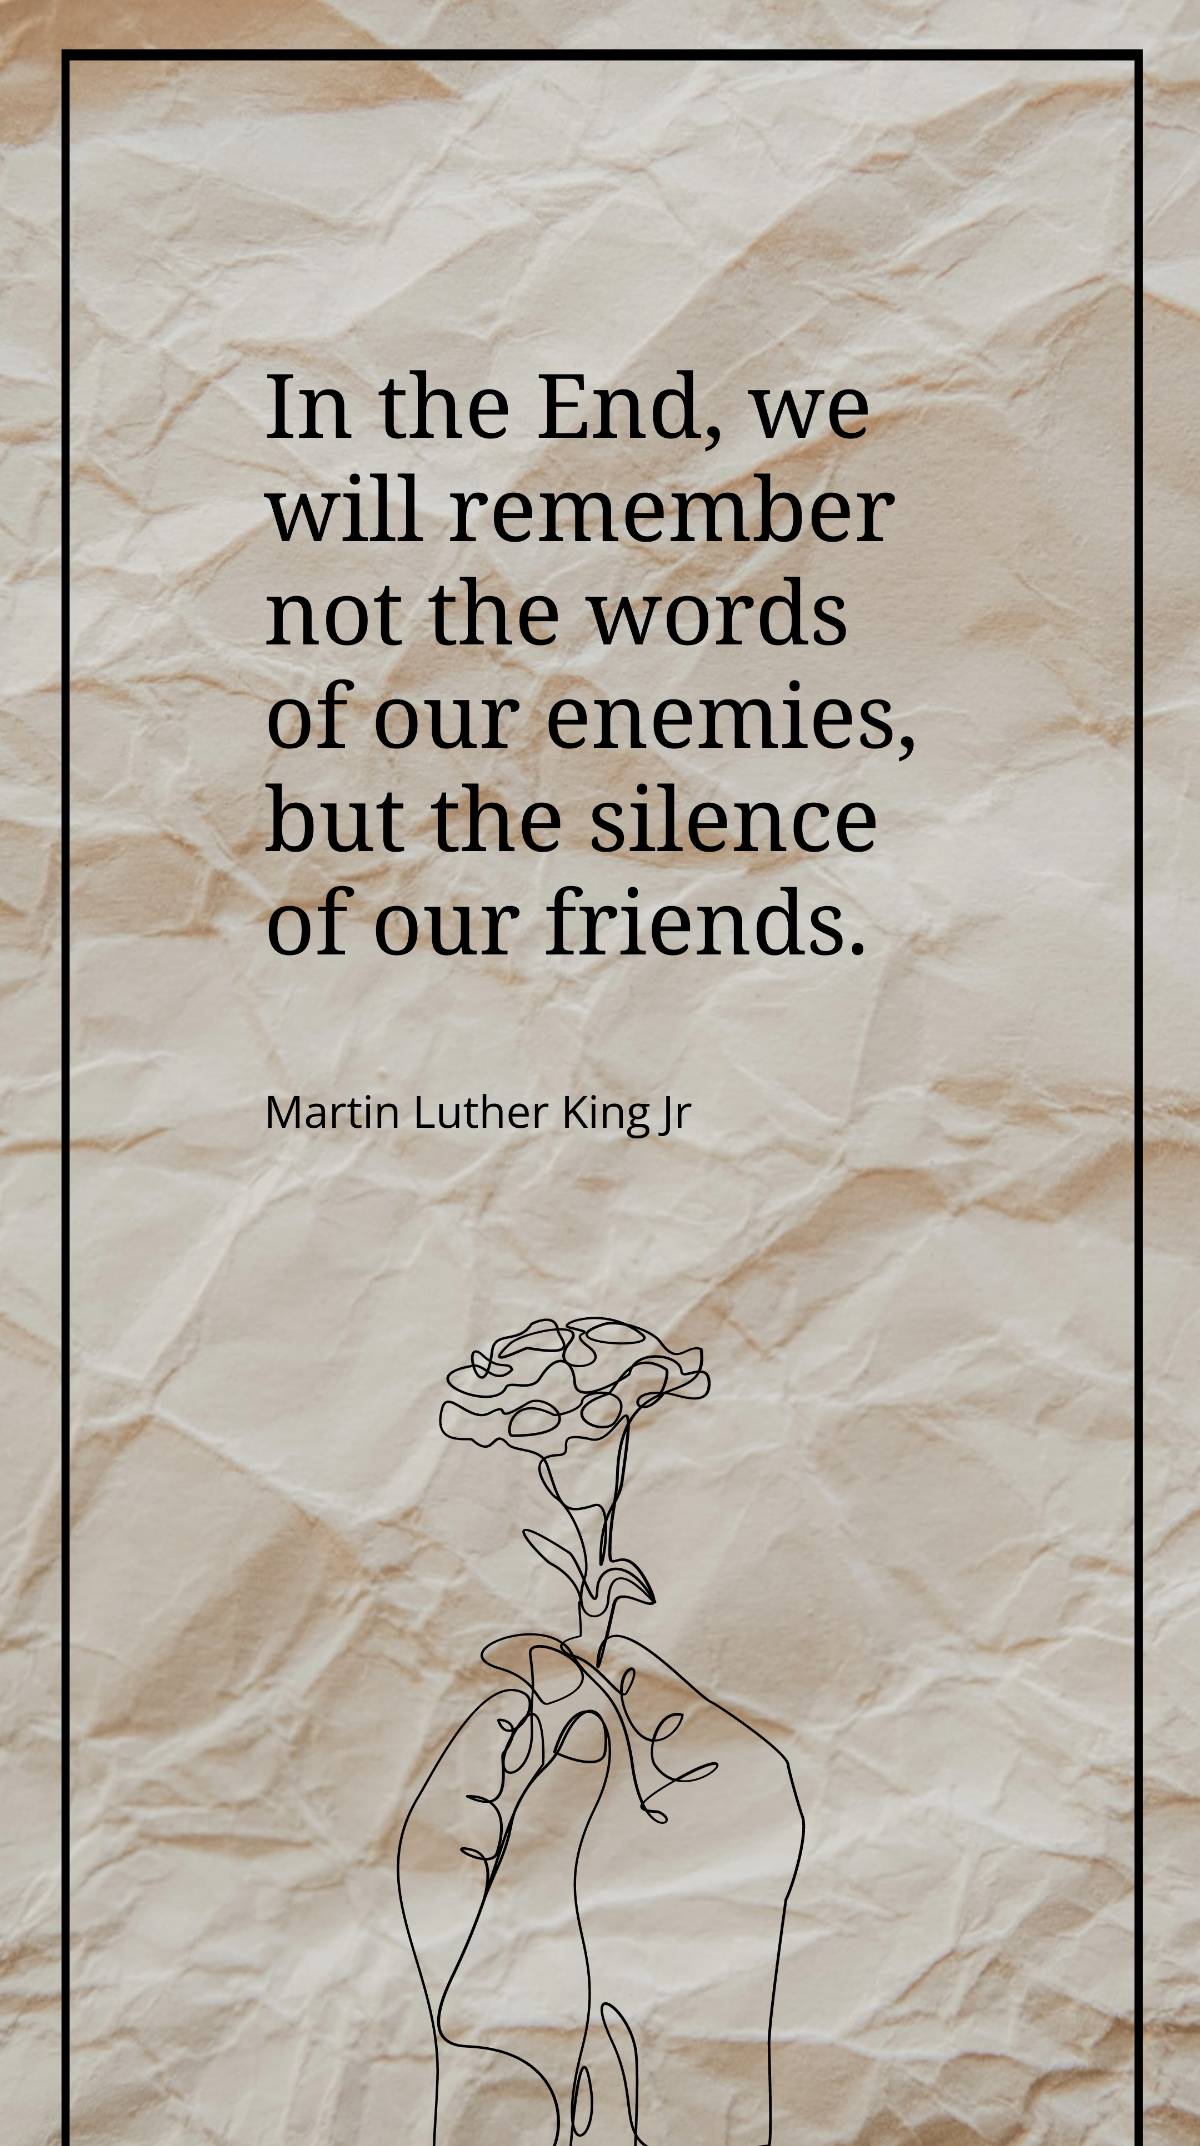 Martin Luther King Jr - 